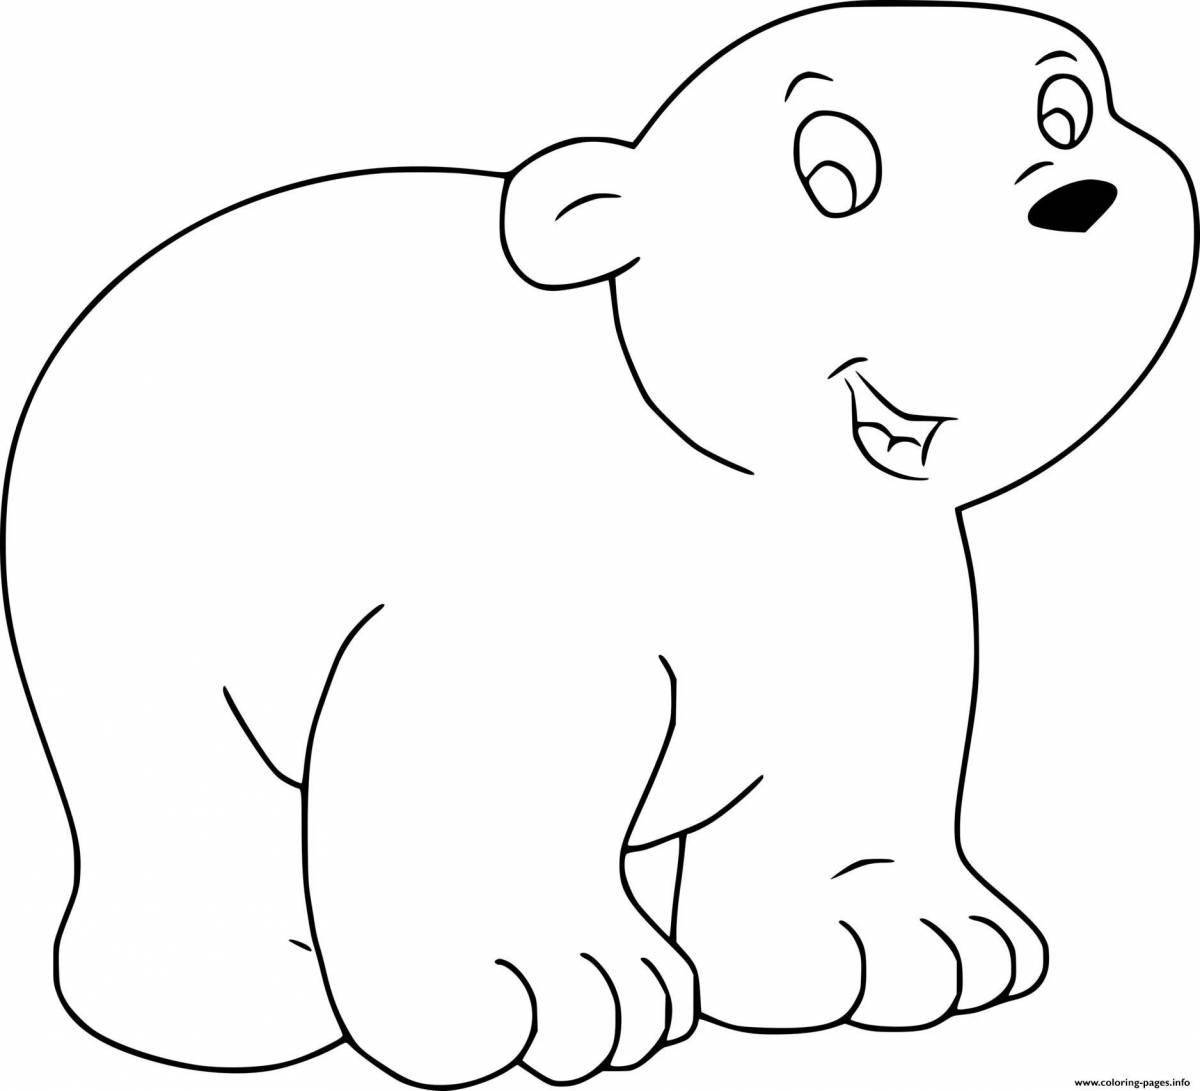 Cheerful polar bear coloring for children 5-6 years old